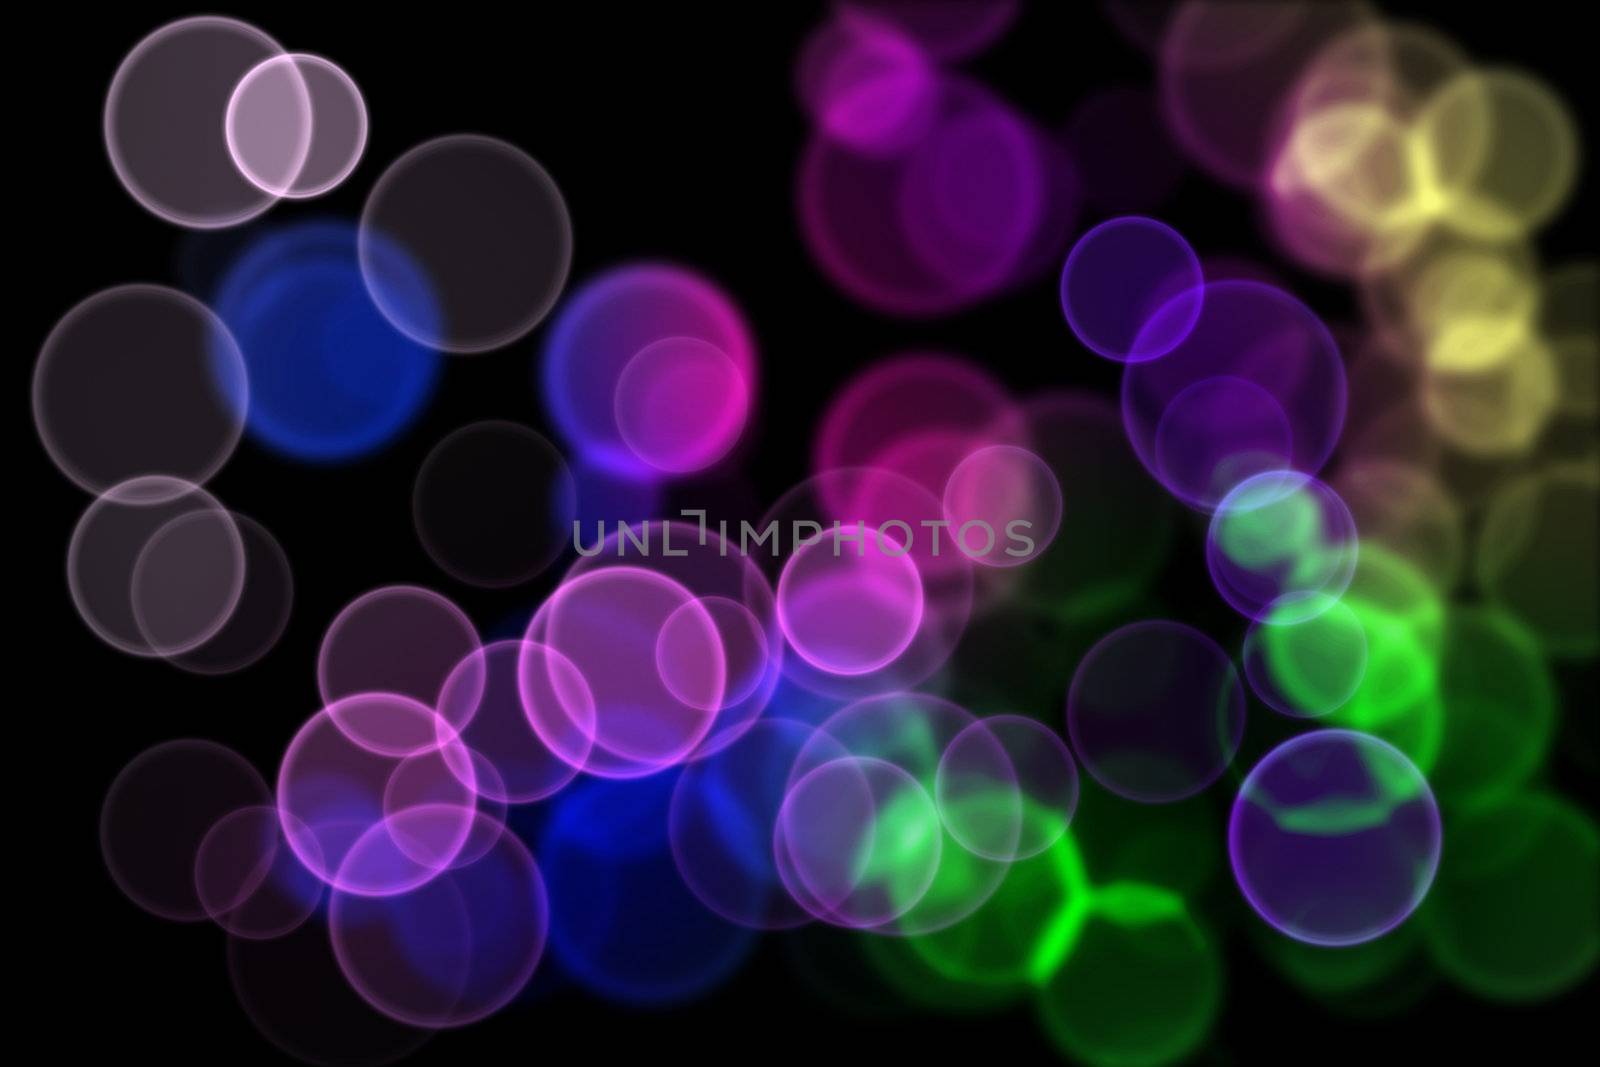 Many colored lights on a black background